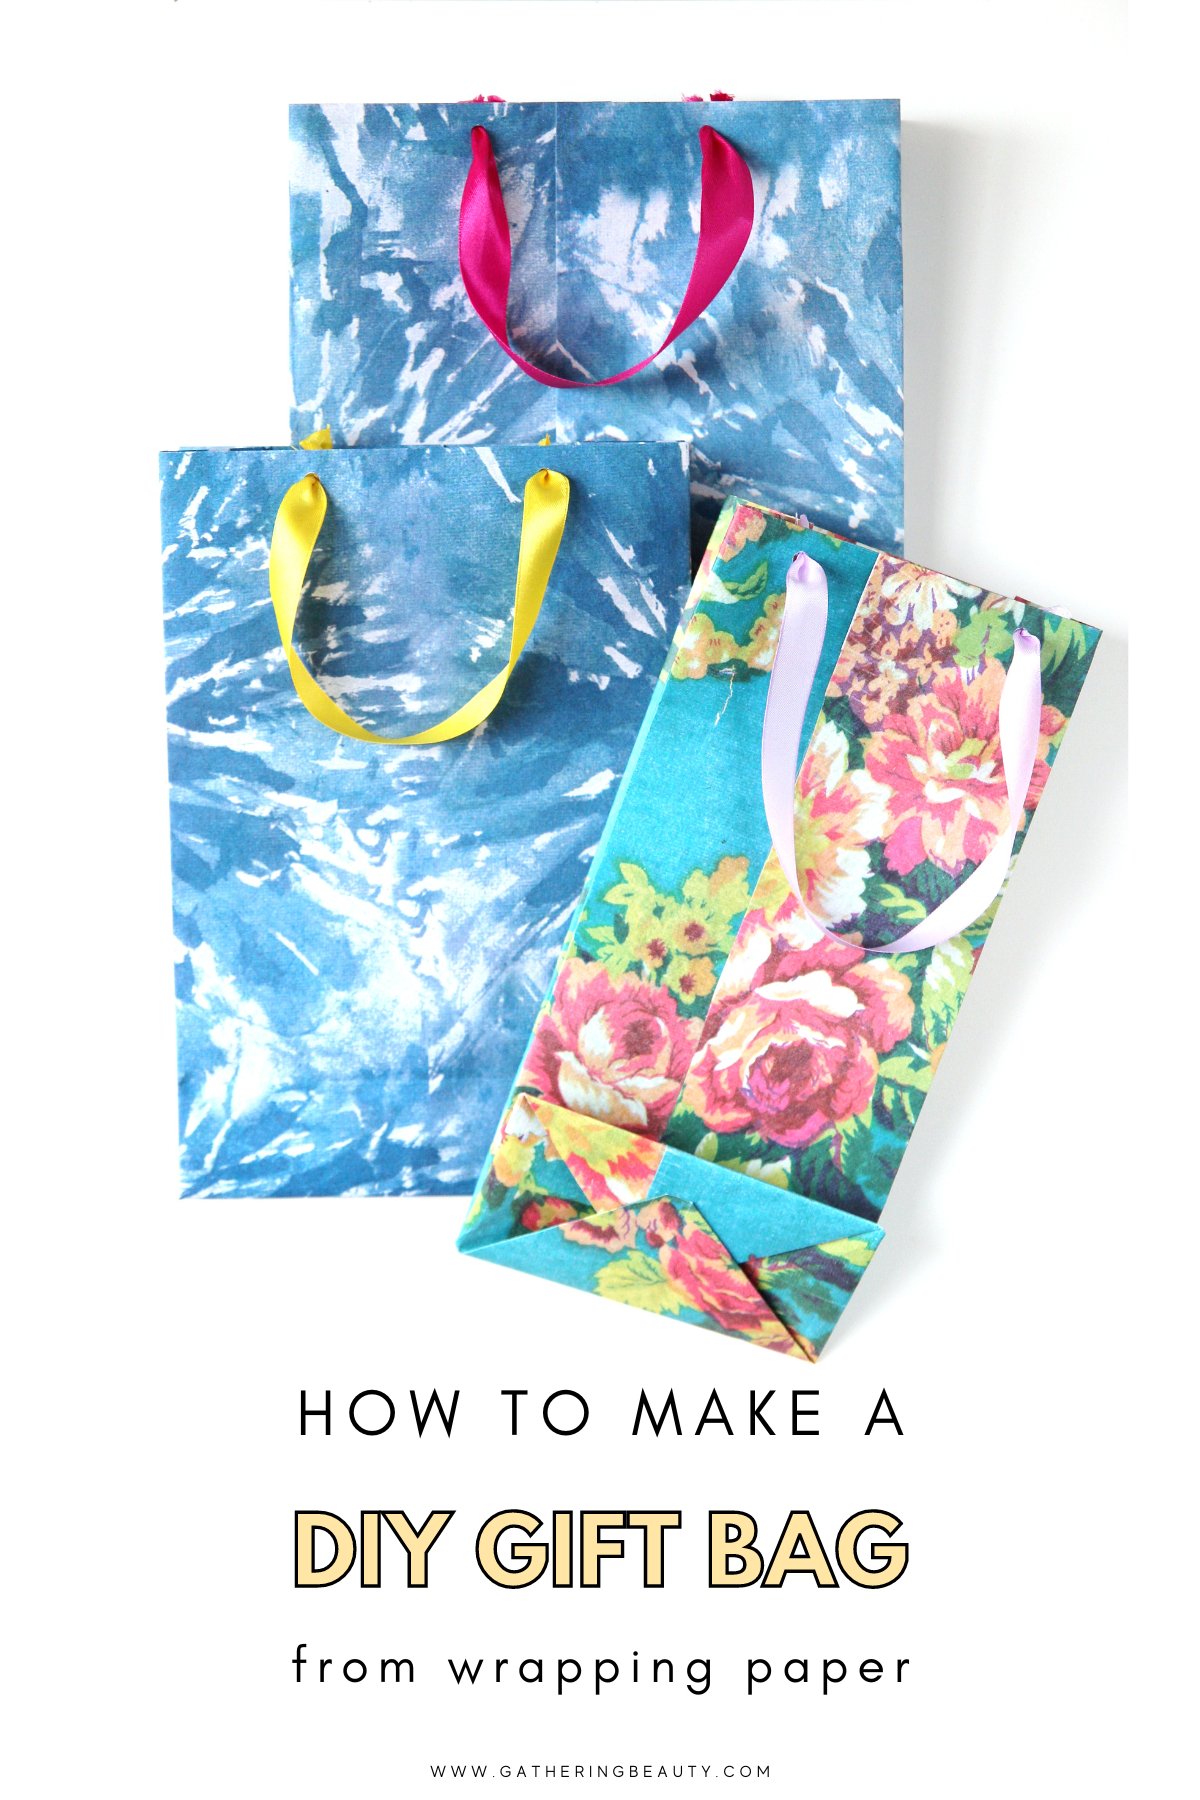 10 Tips to Make Your Gift More Attractive | ToteBagFactory